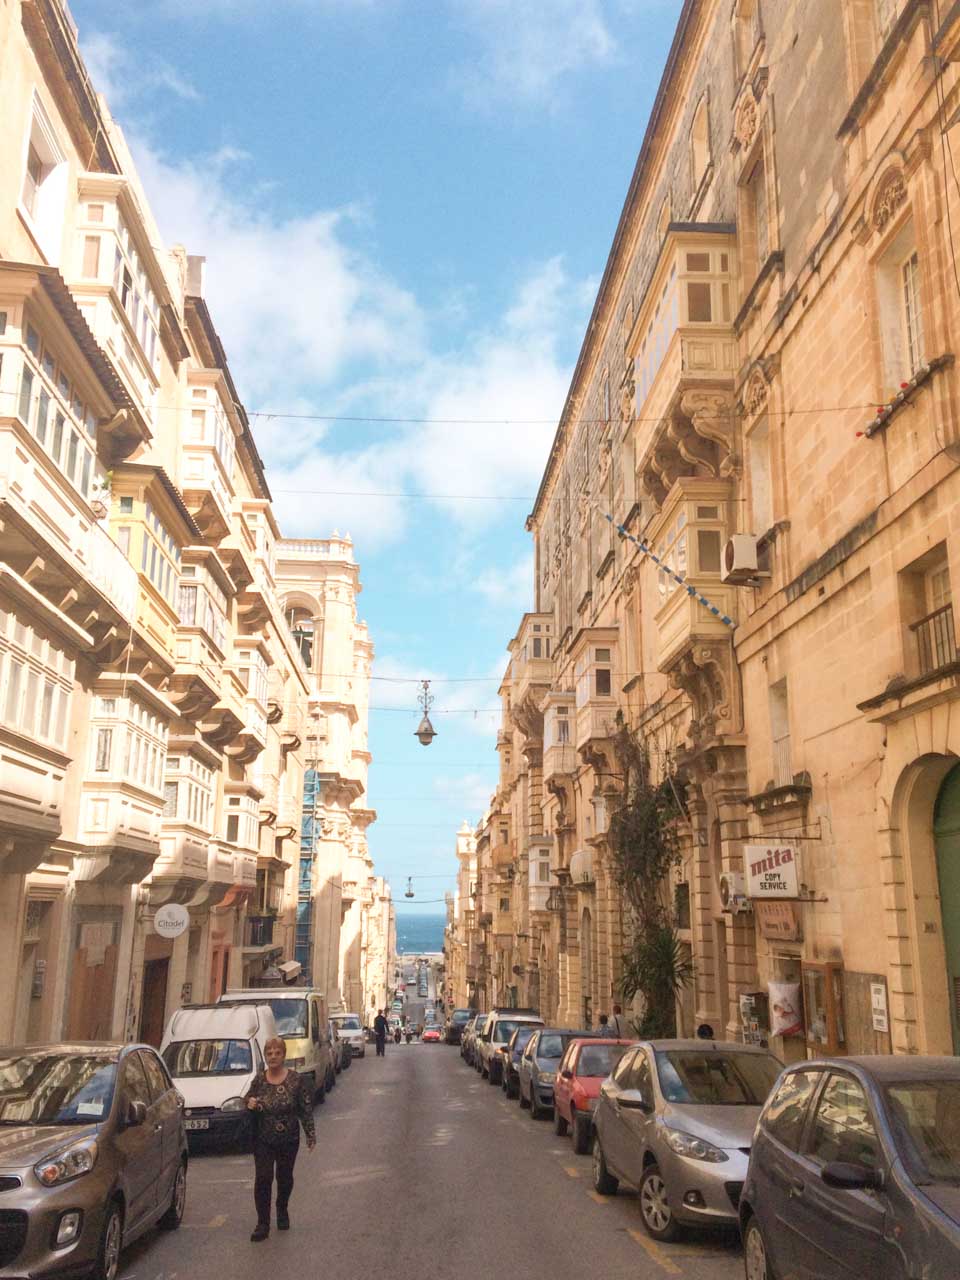 A street in Valletta, Malta lined with cars